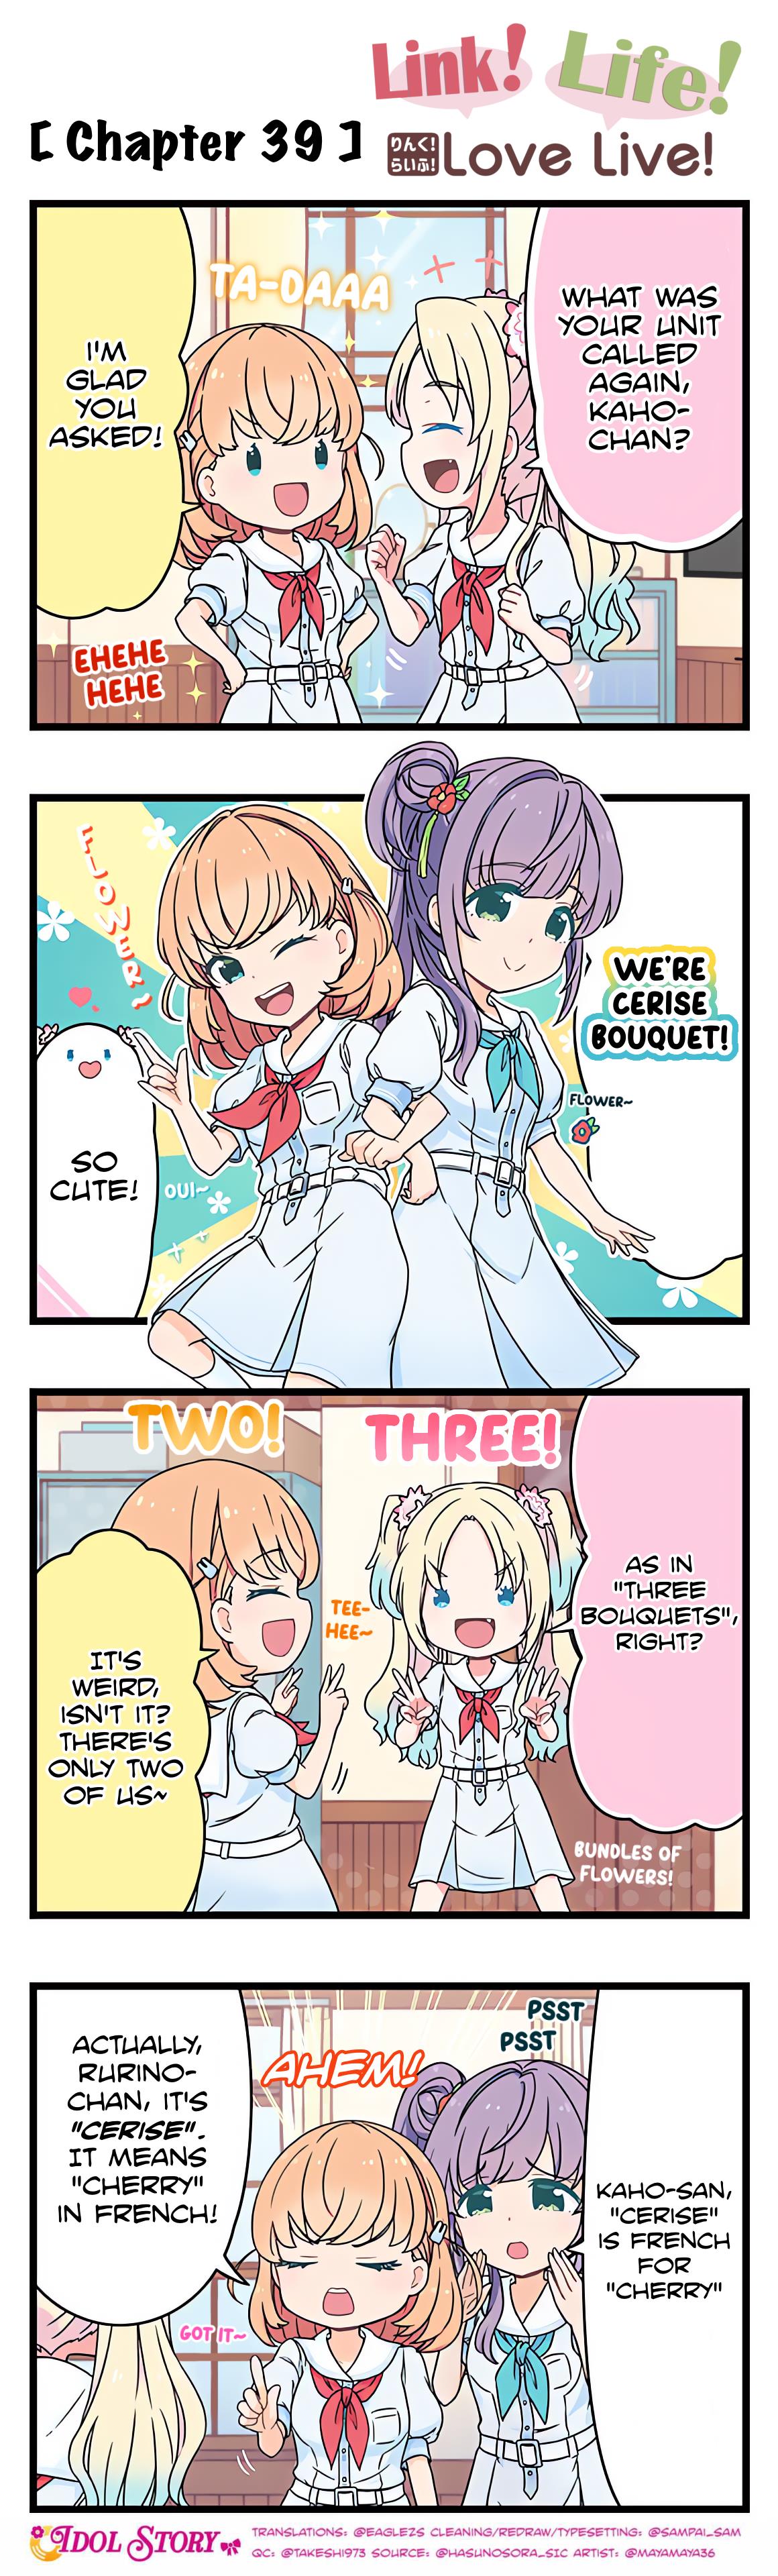 Link! Life! Love Live! Chapter 39 - Picture 1